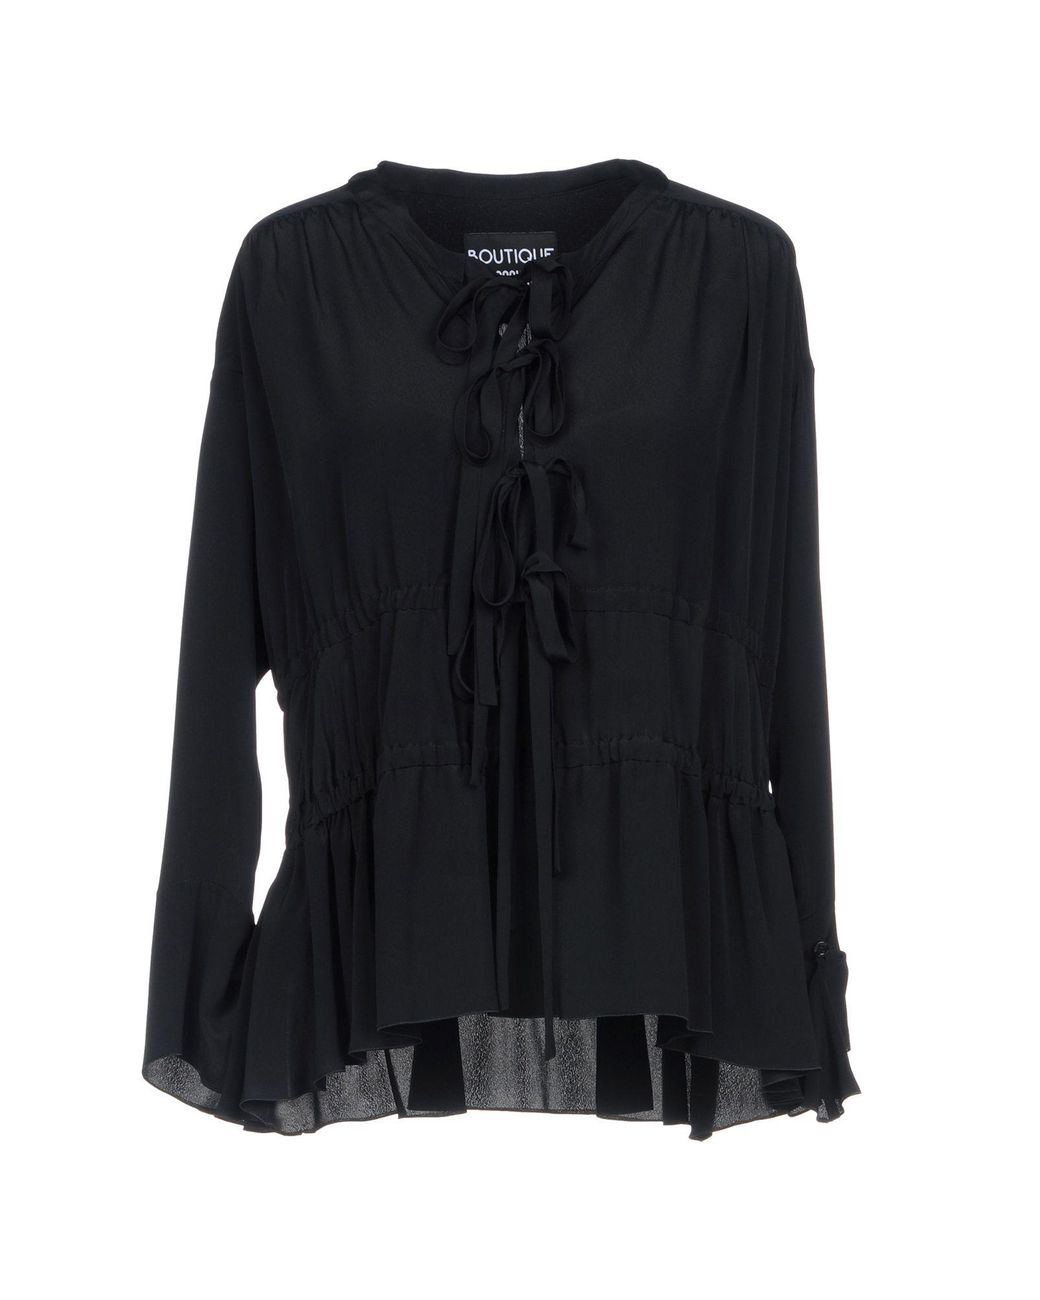 Boutique Moschino Synthetic Blouse in Black - Lyst